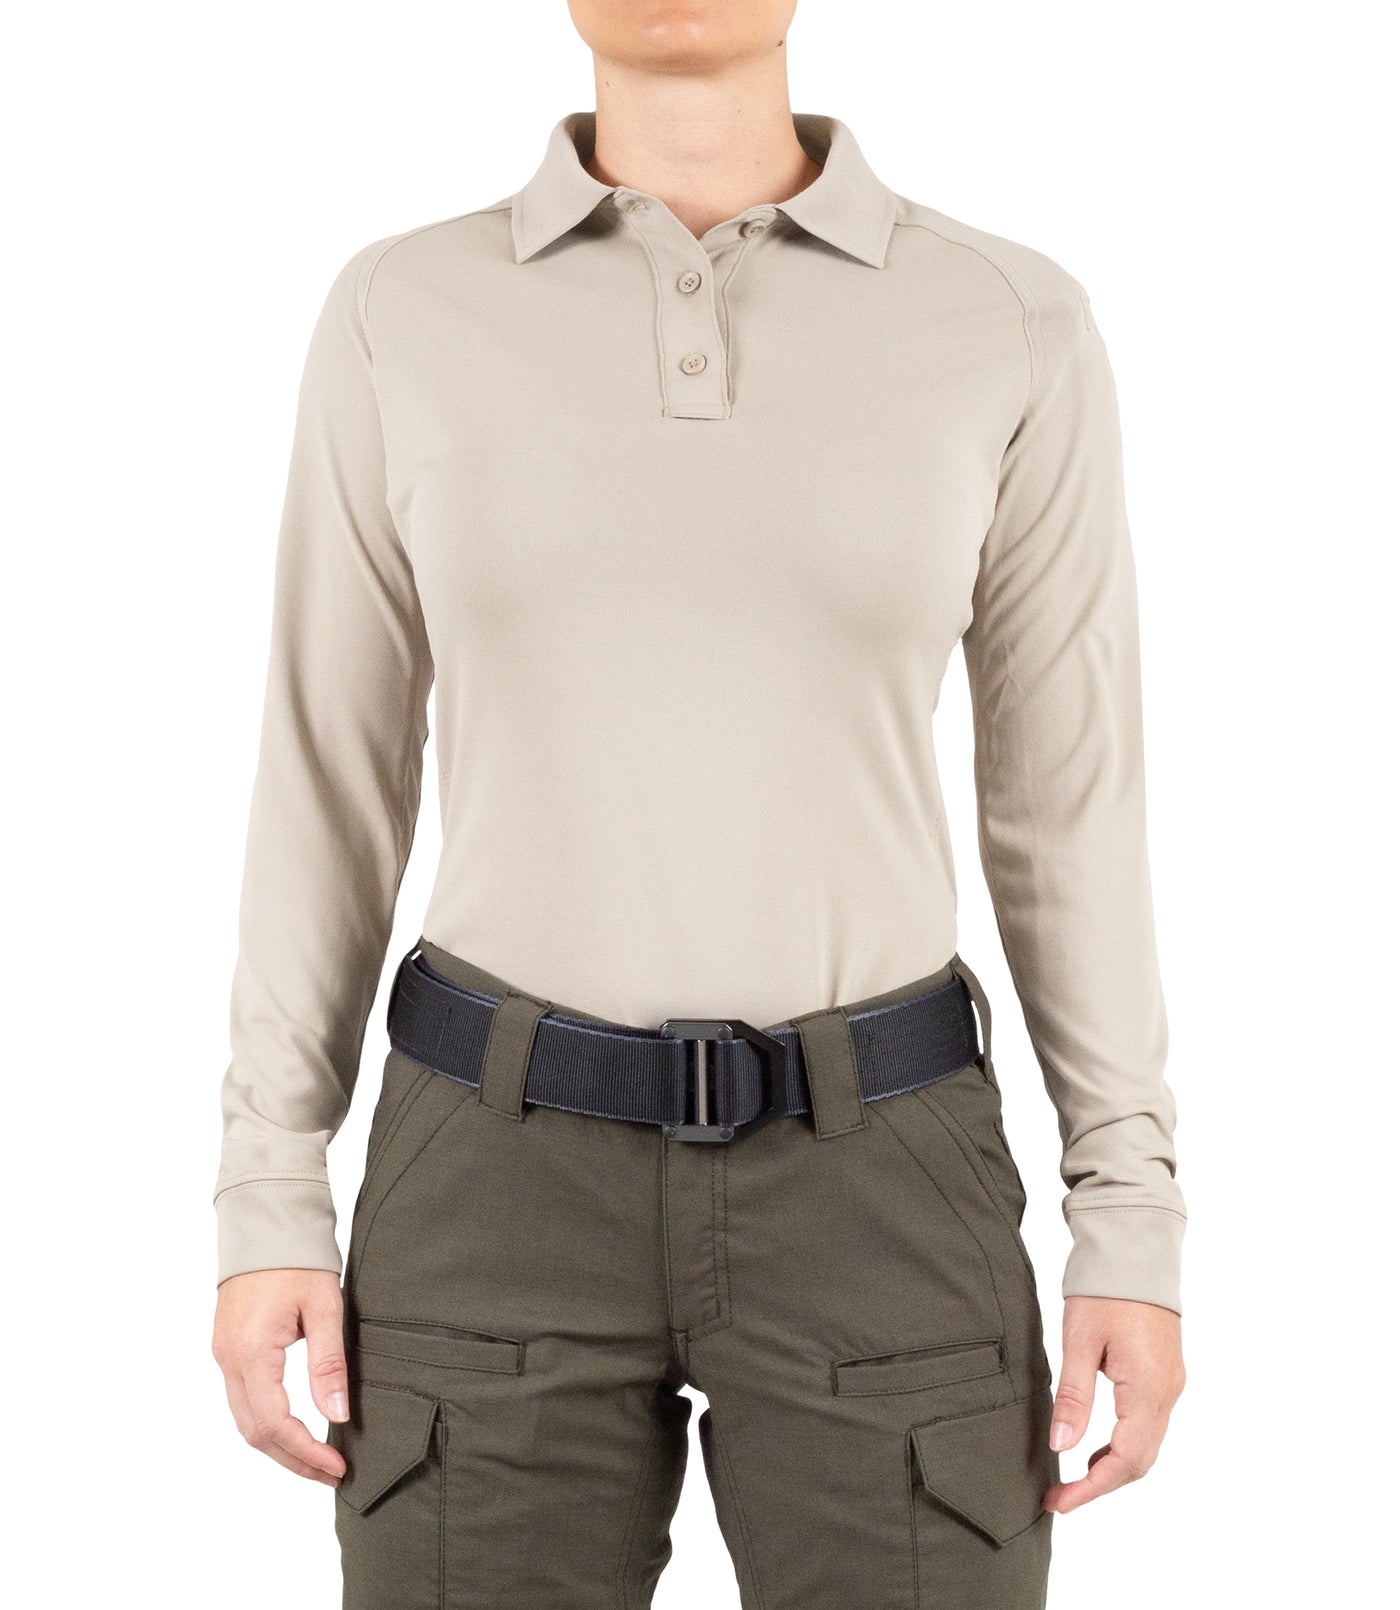 Women's Performance Long Sleeve Polo – First Tactical